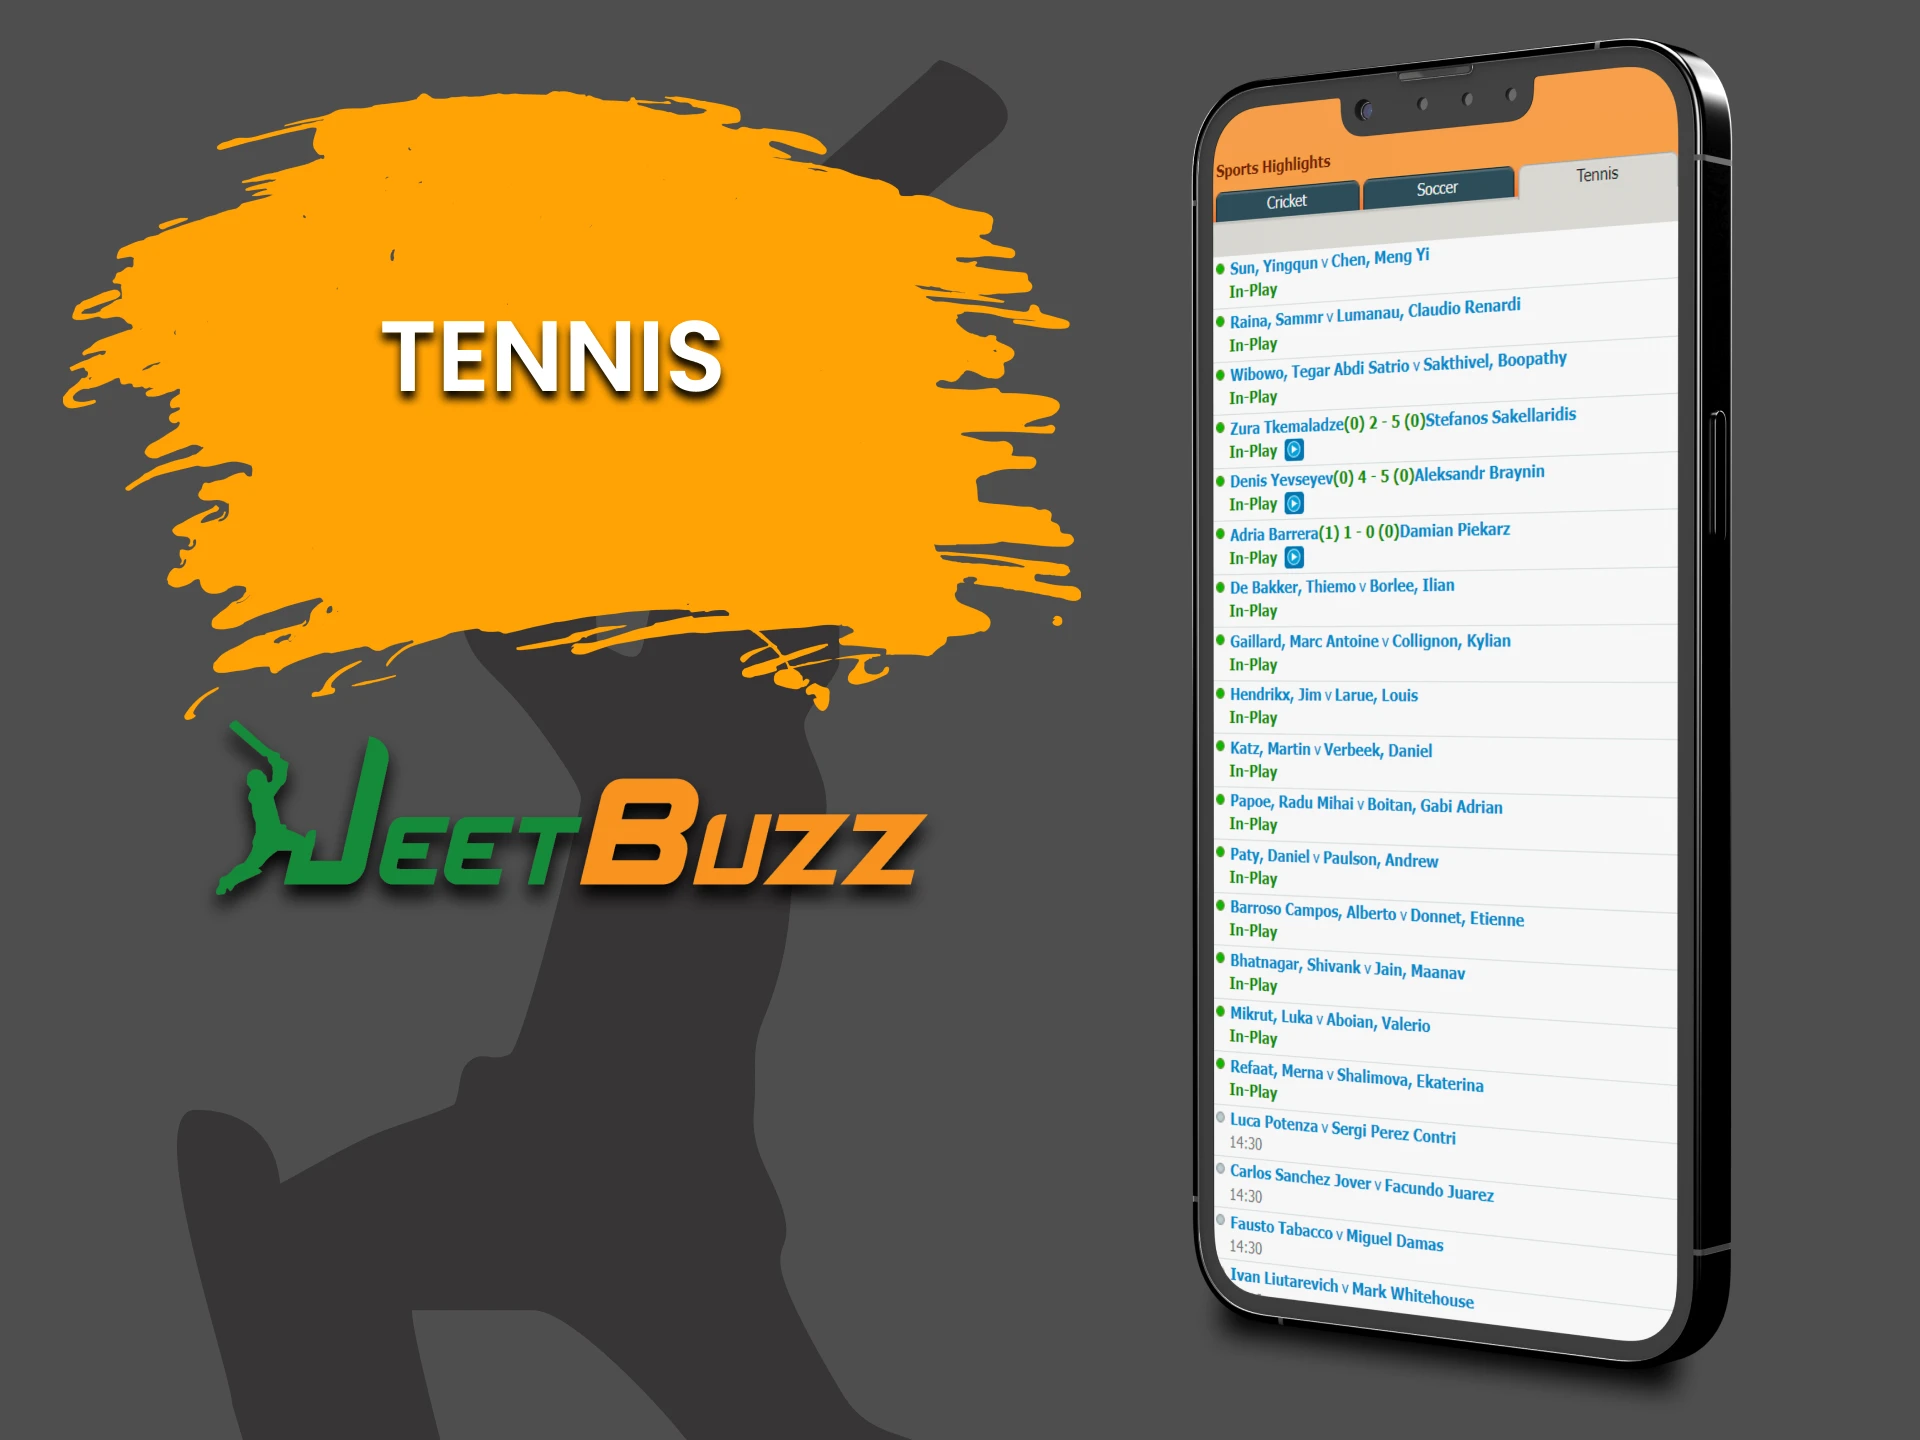 For sports betting on the JeetBuzz app, select Tennis.